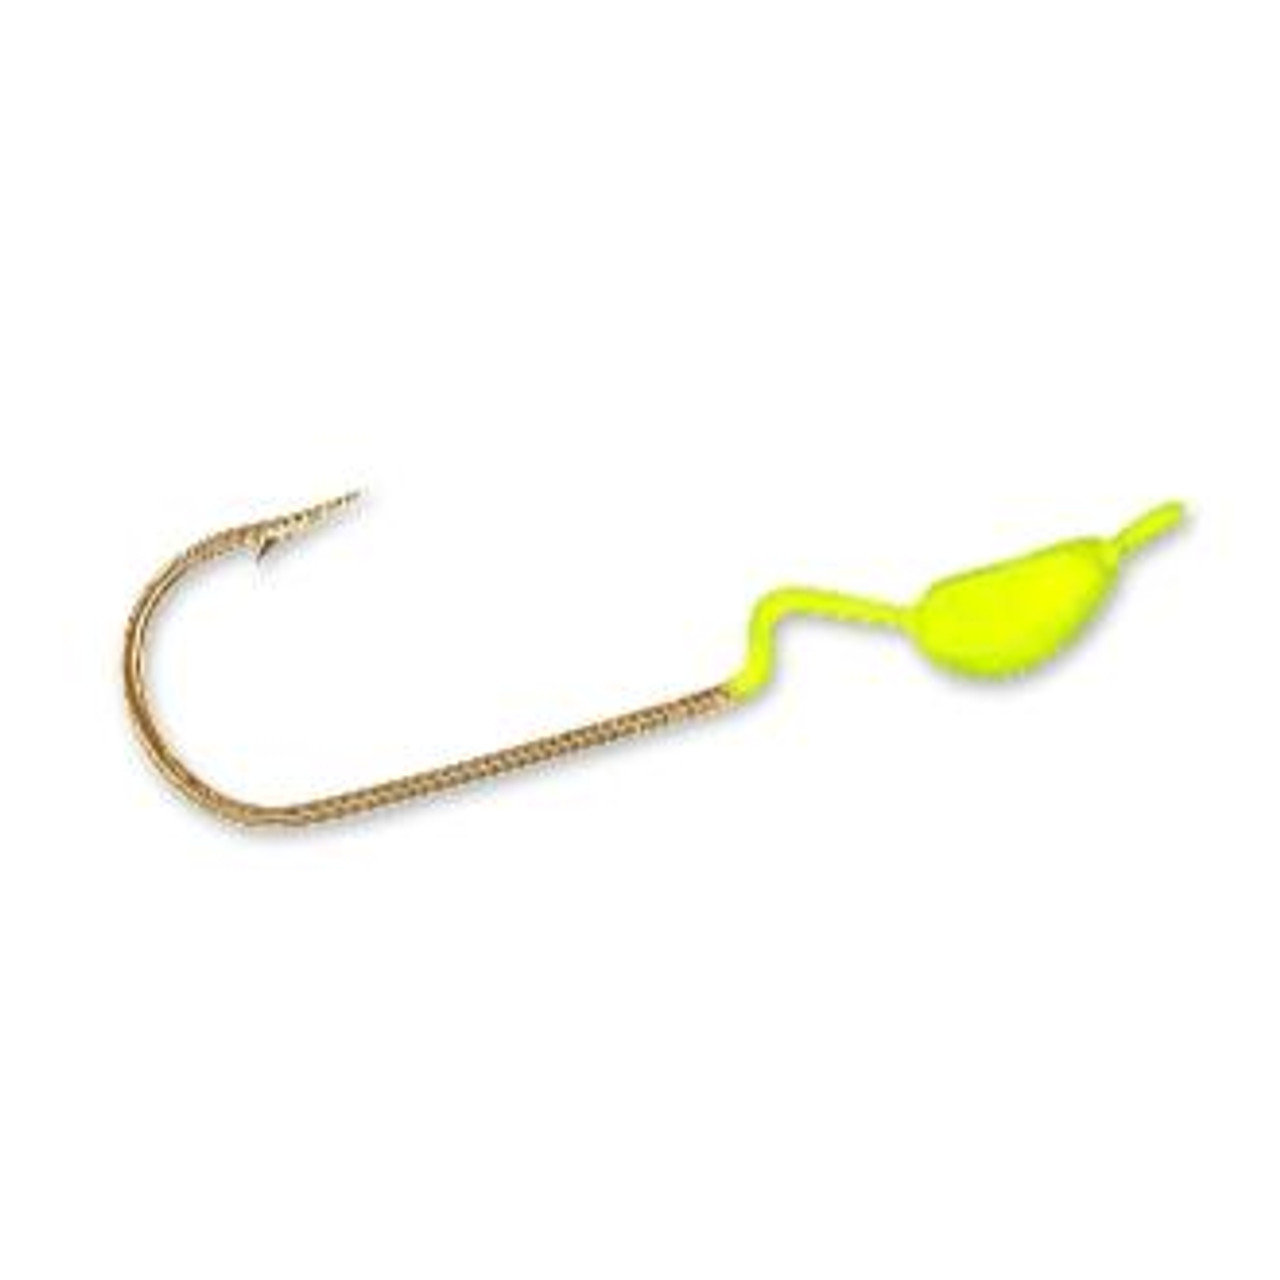 https://cdn11.bigcommerce.com/s-stfpjhht/images/stencil/1280x1280/products/12433/29841/Charlie-Brewers-Weedless-Crappie-Slider-Double-Lite-Wire-Hook-034398098523_image1__06414.1522857049.jpg?c=2